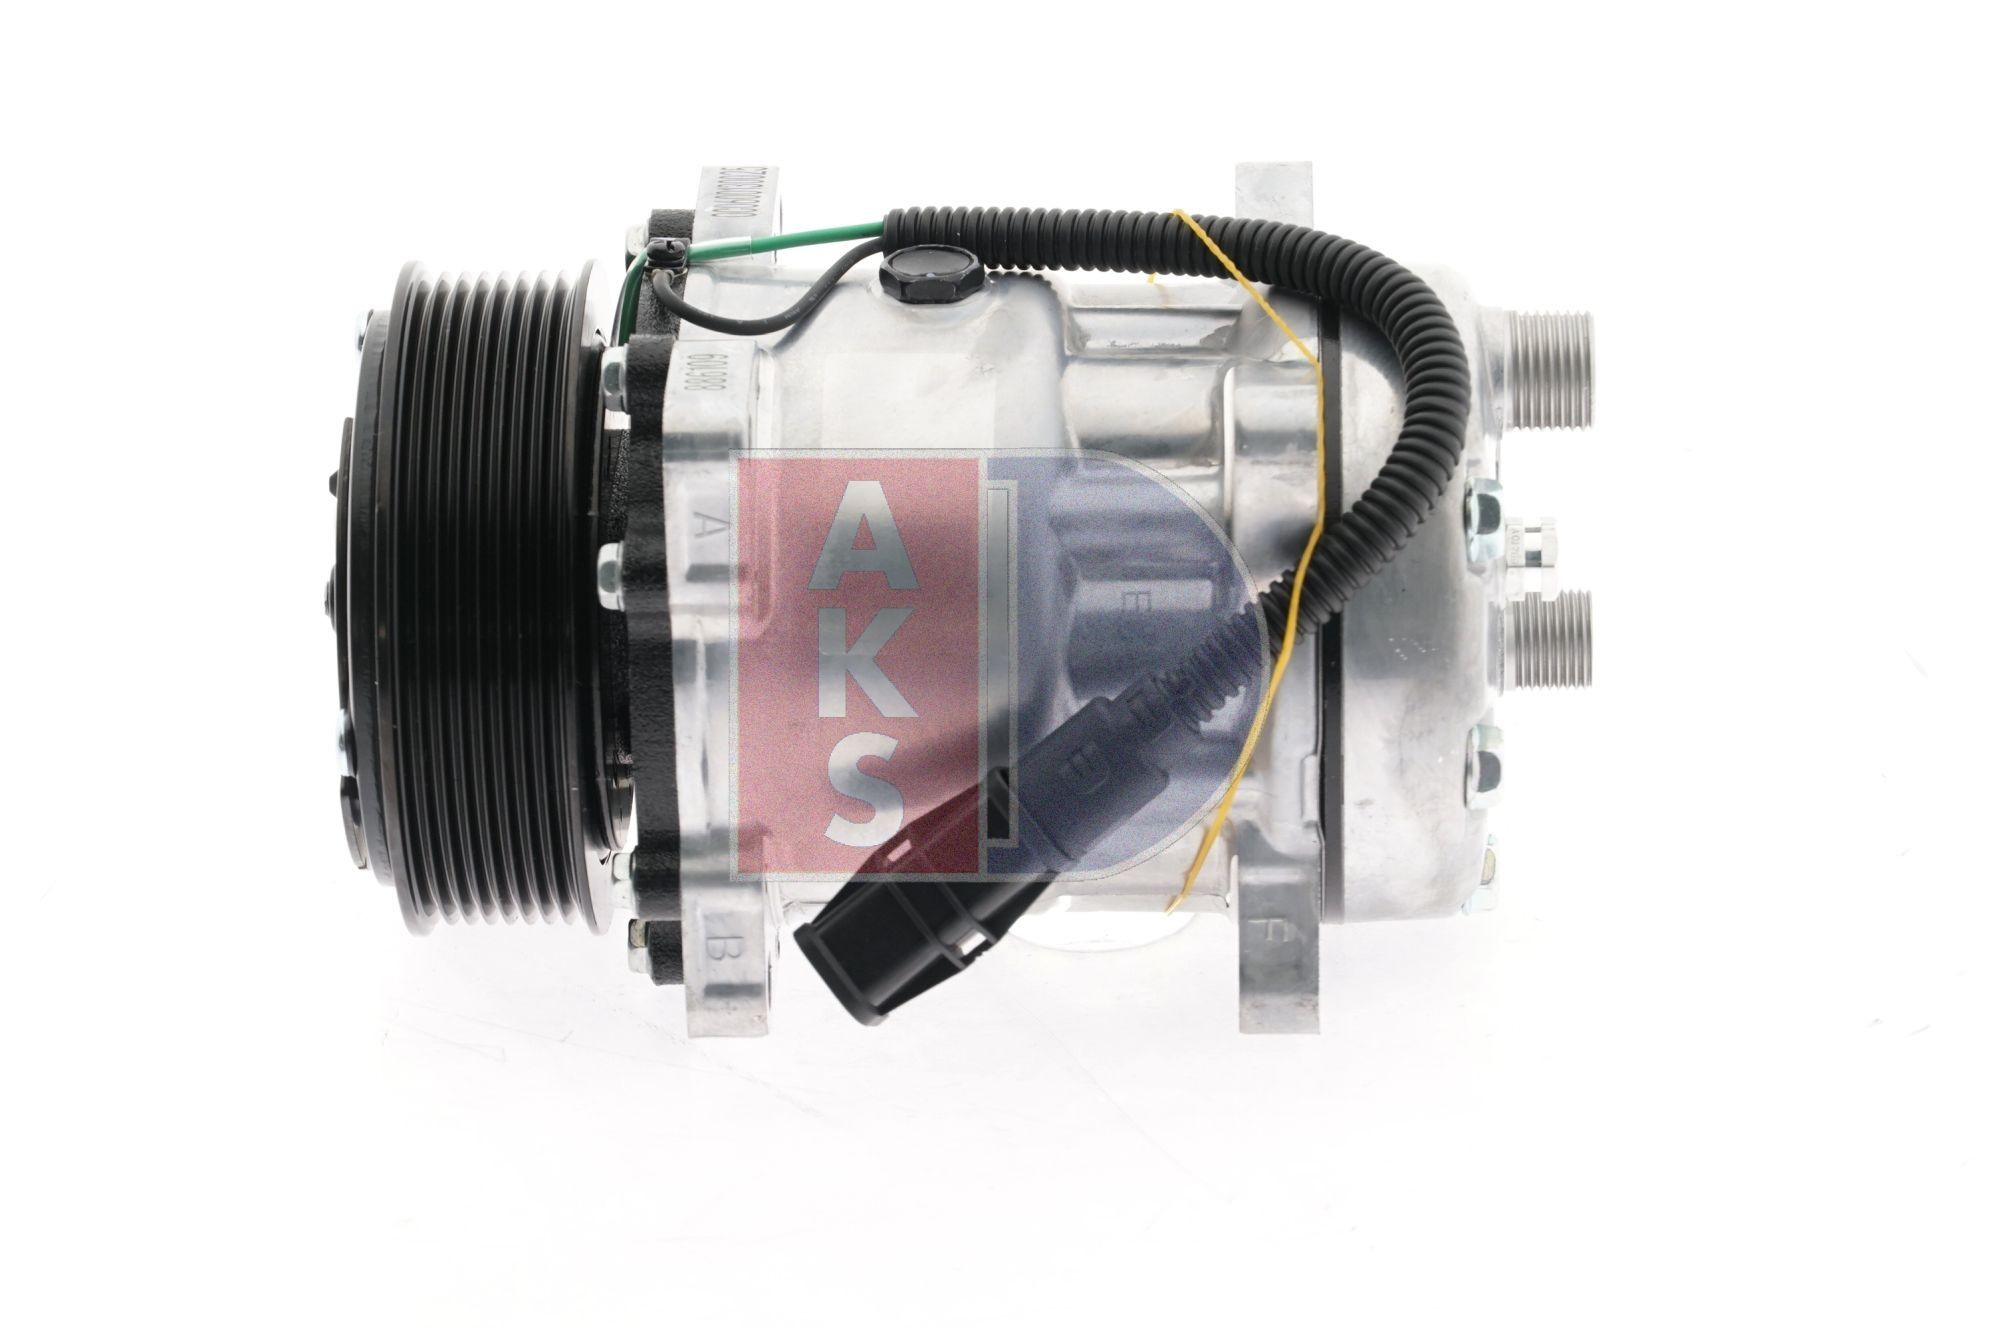 Air conditioning compressor 851964N from AKS DASIS